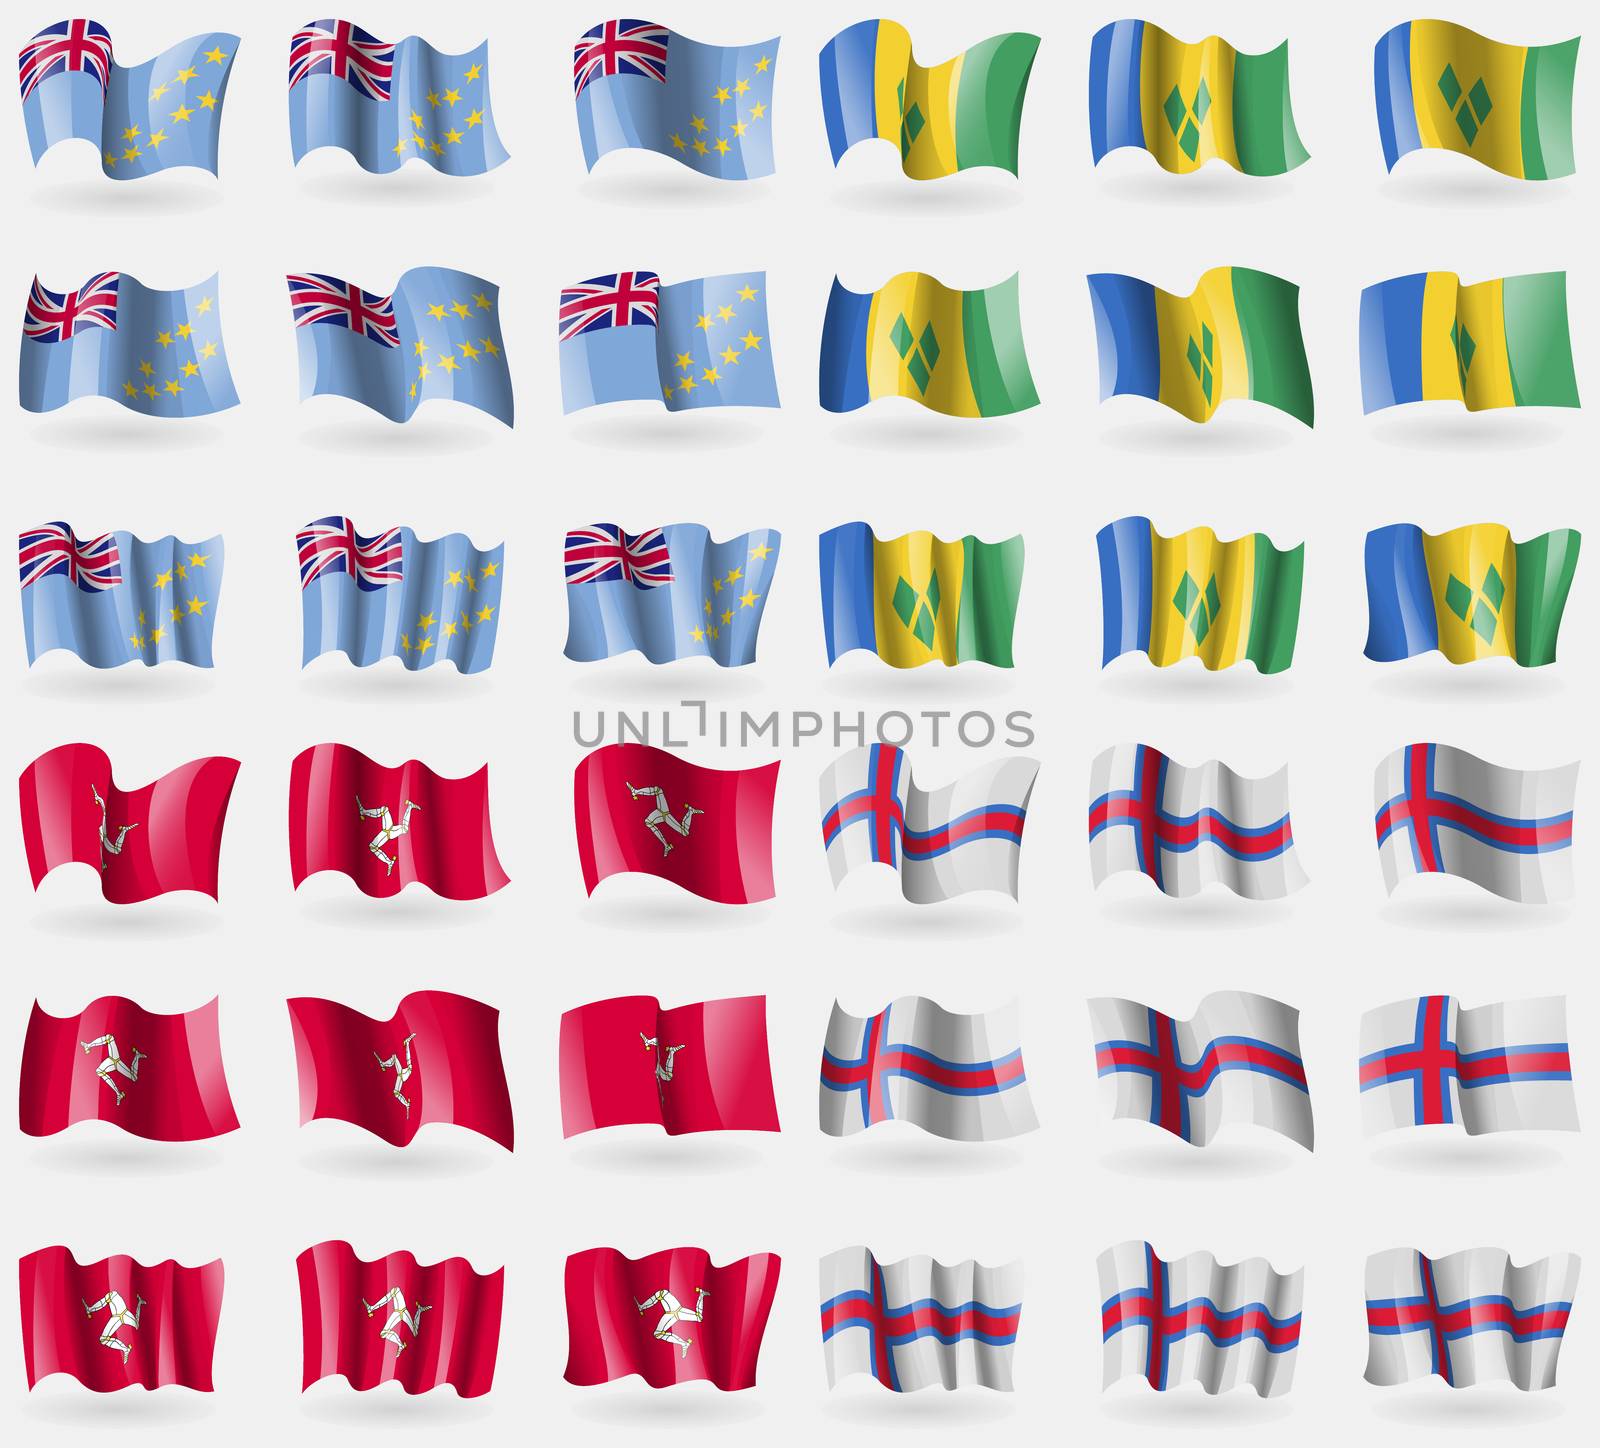 Tuvalu, Saint Vincent and Grenadines, Isle of man, Faroe Islands. Set of 36 flags of the countries of the world. illustration